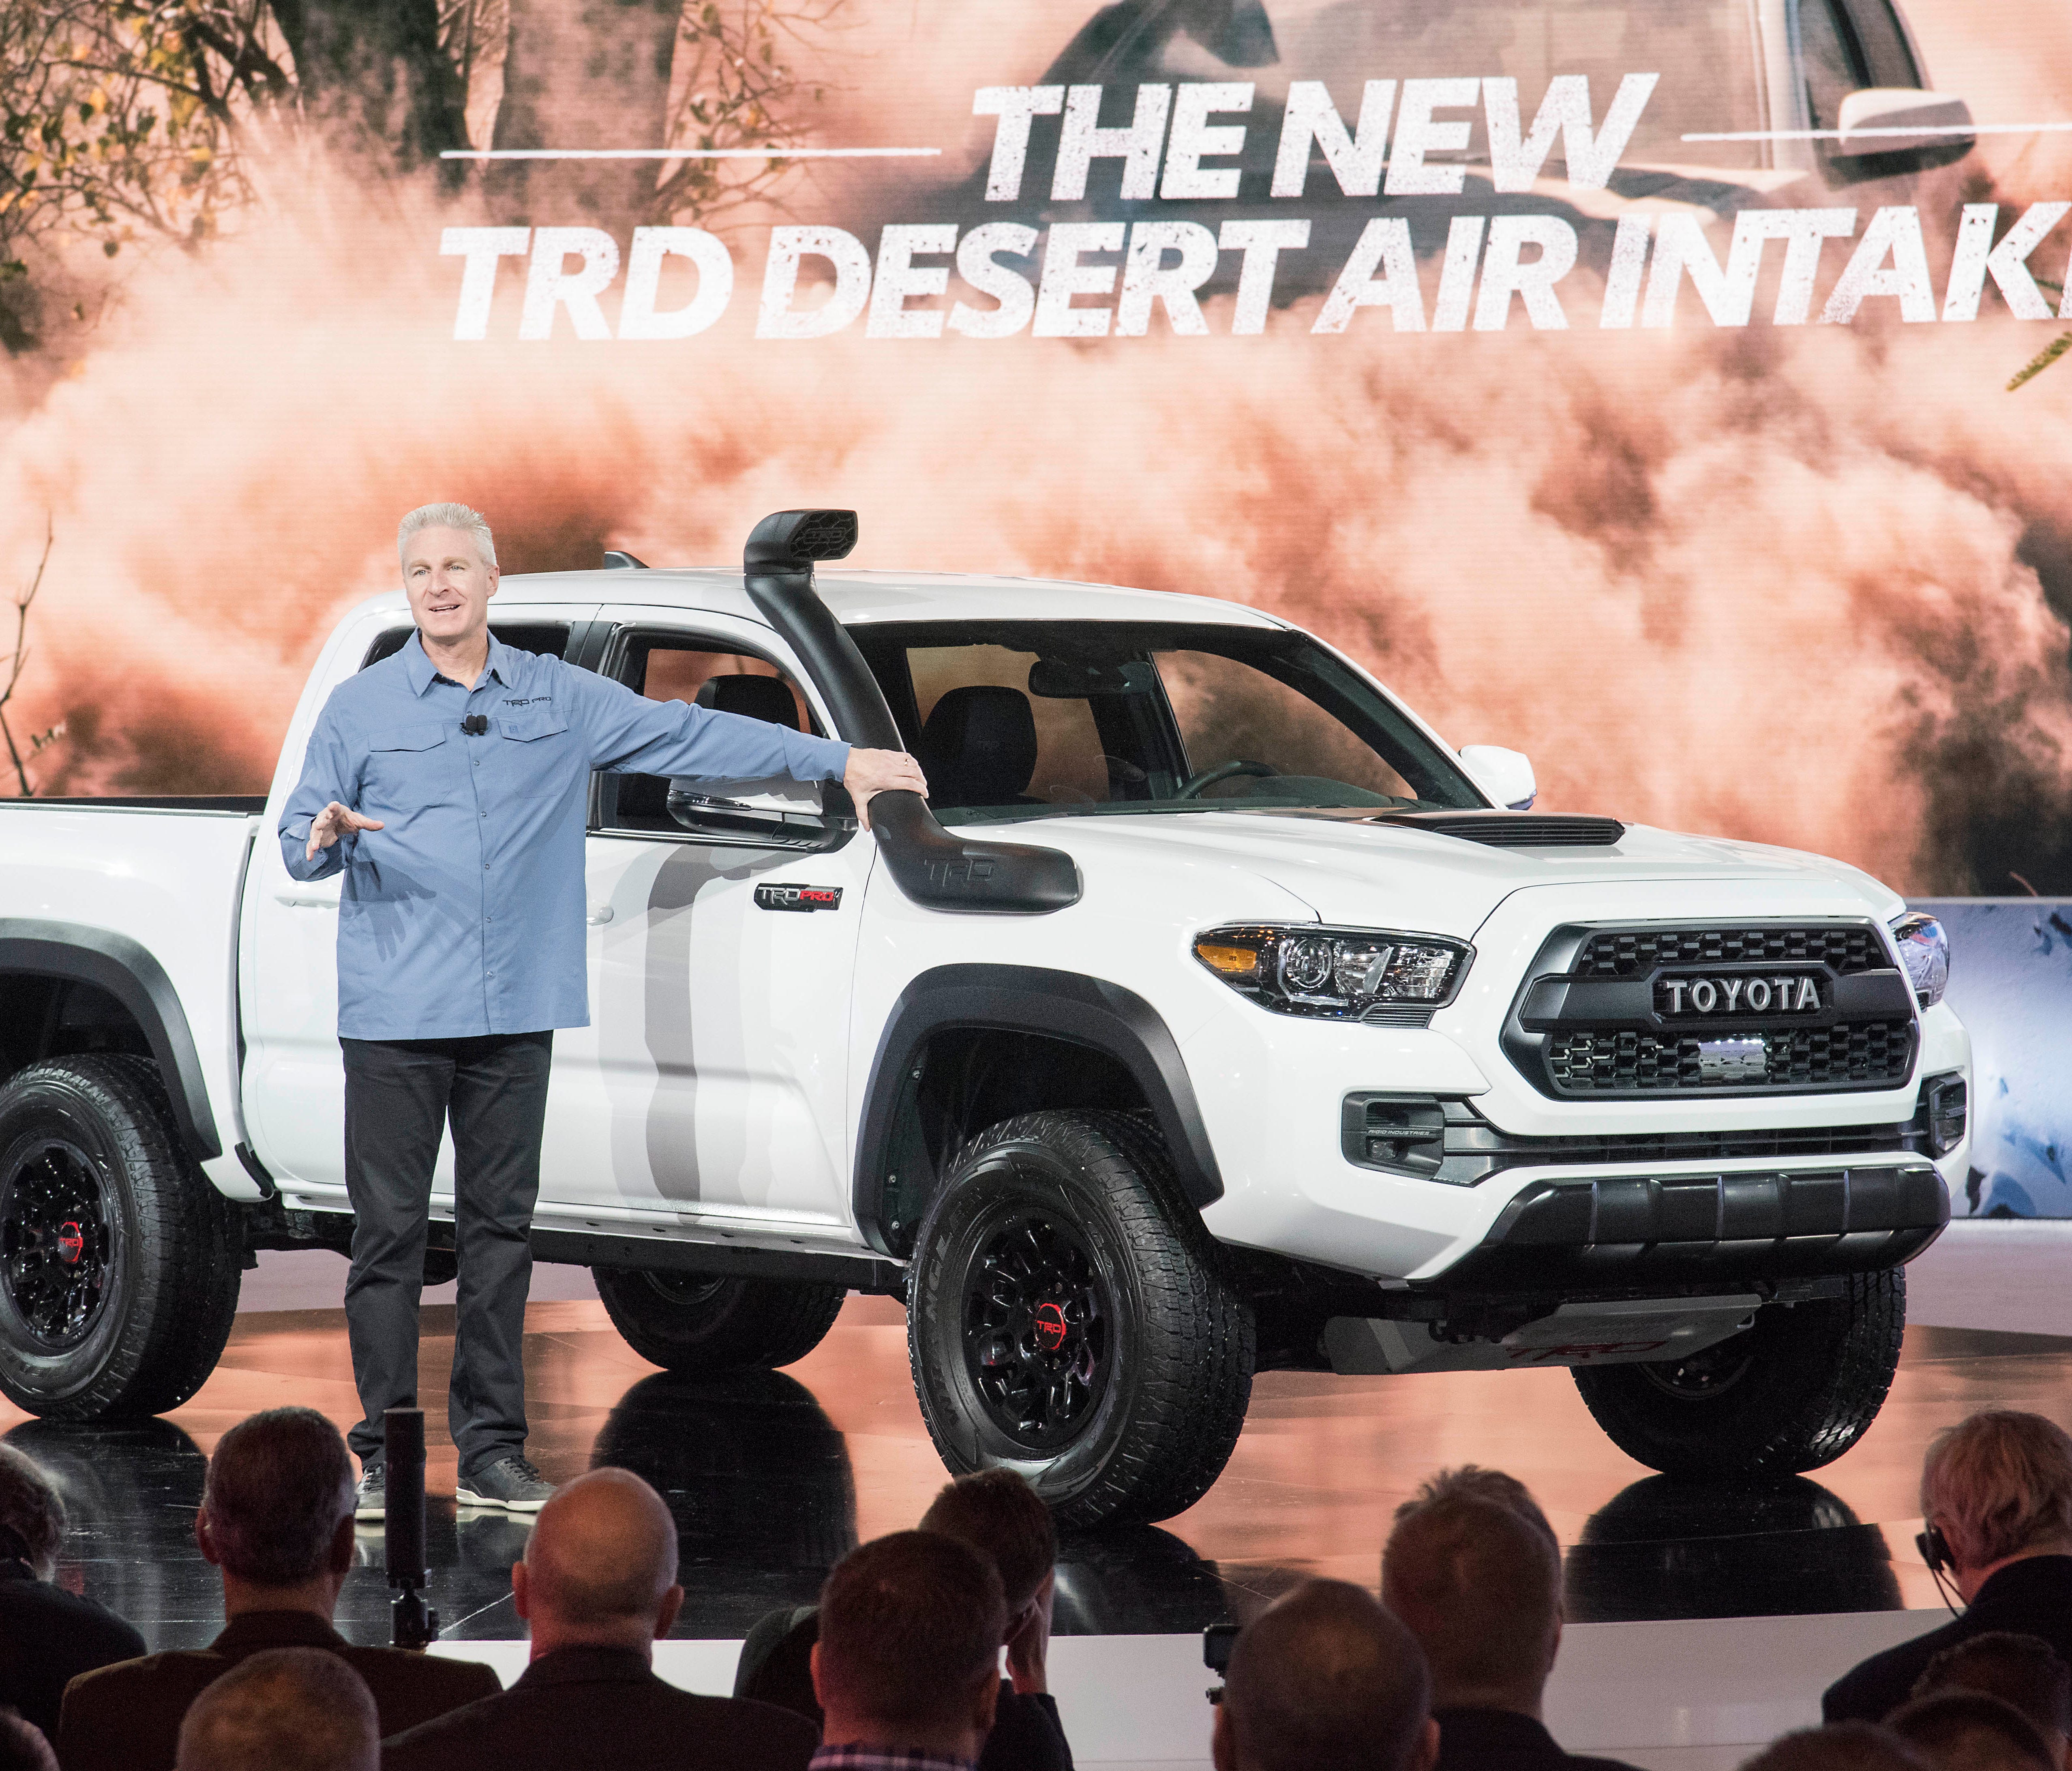 Toyota Division chief Jack Hollis shows off the snorkle breathing device on this truck at the Chicago Auto Show